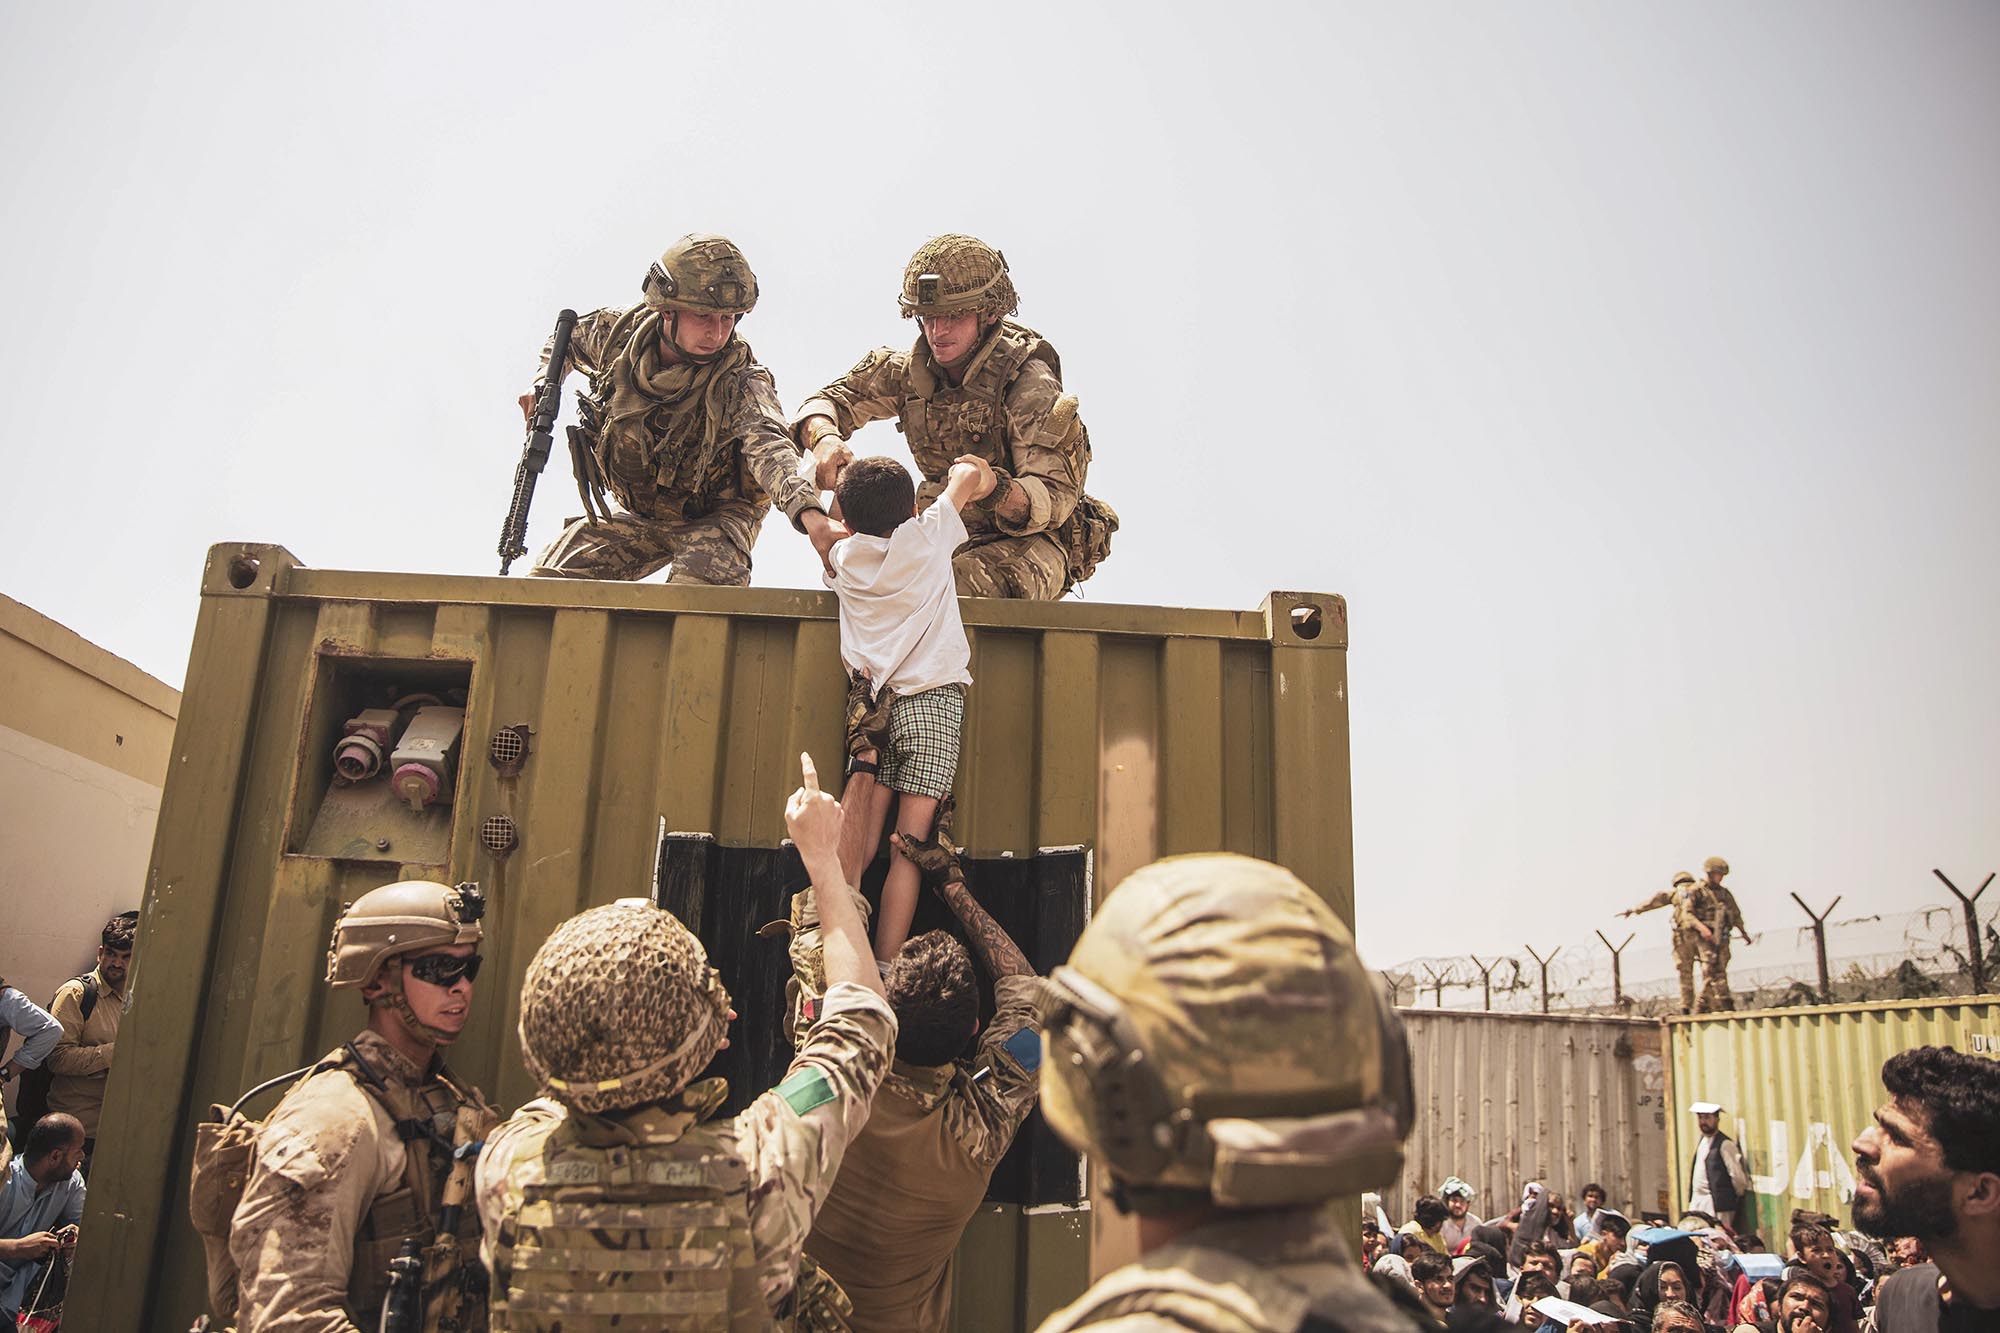 US Marines pull a small child up onto a metal building with them